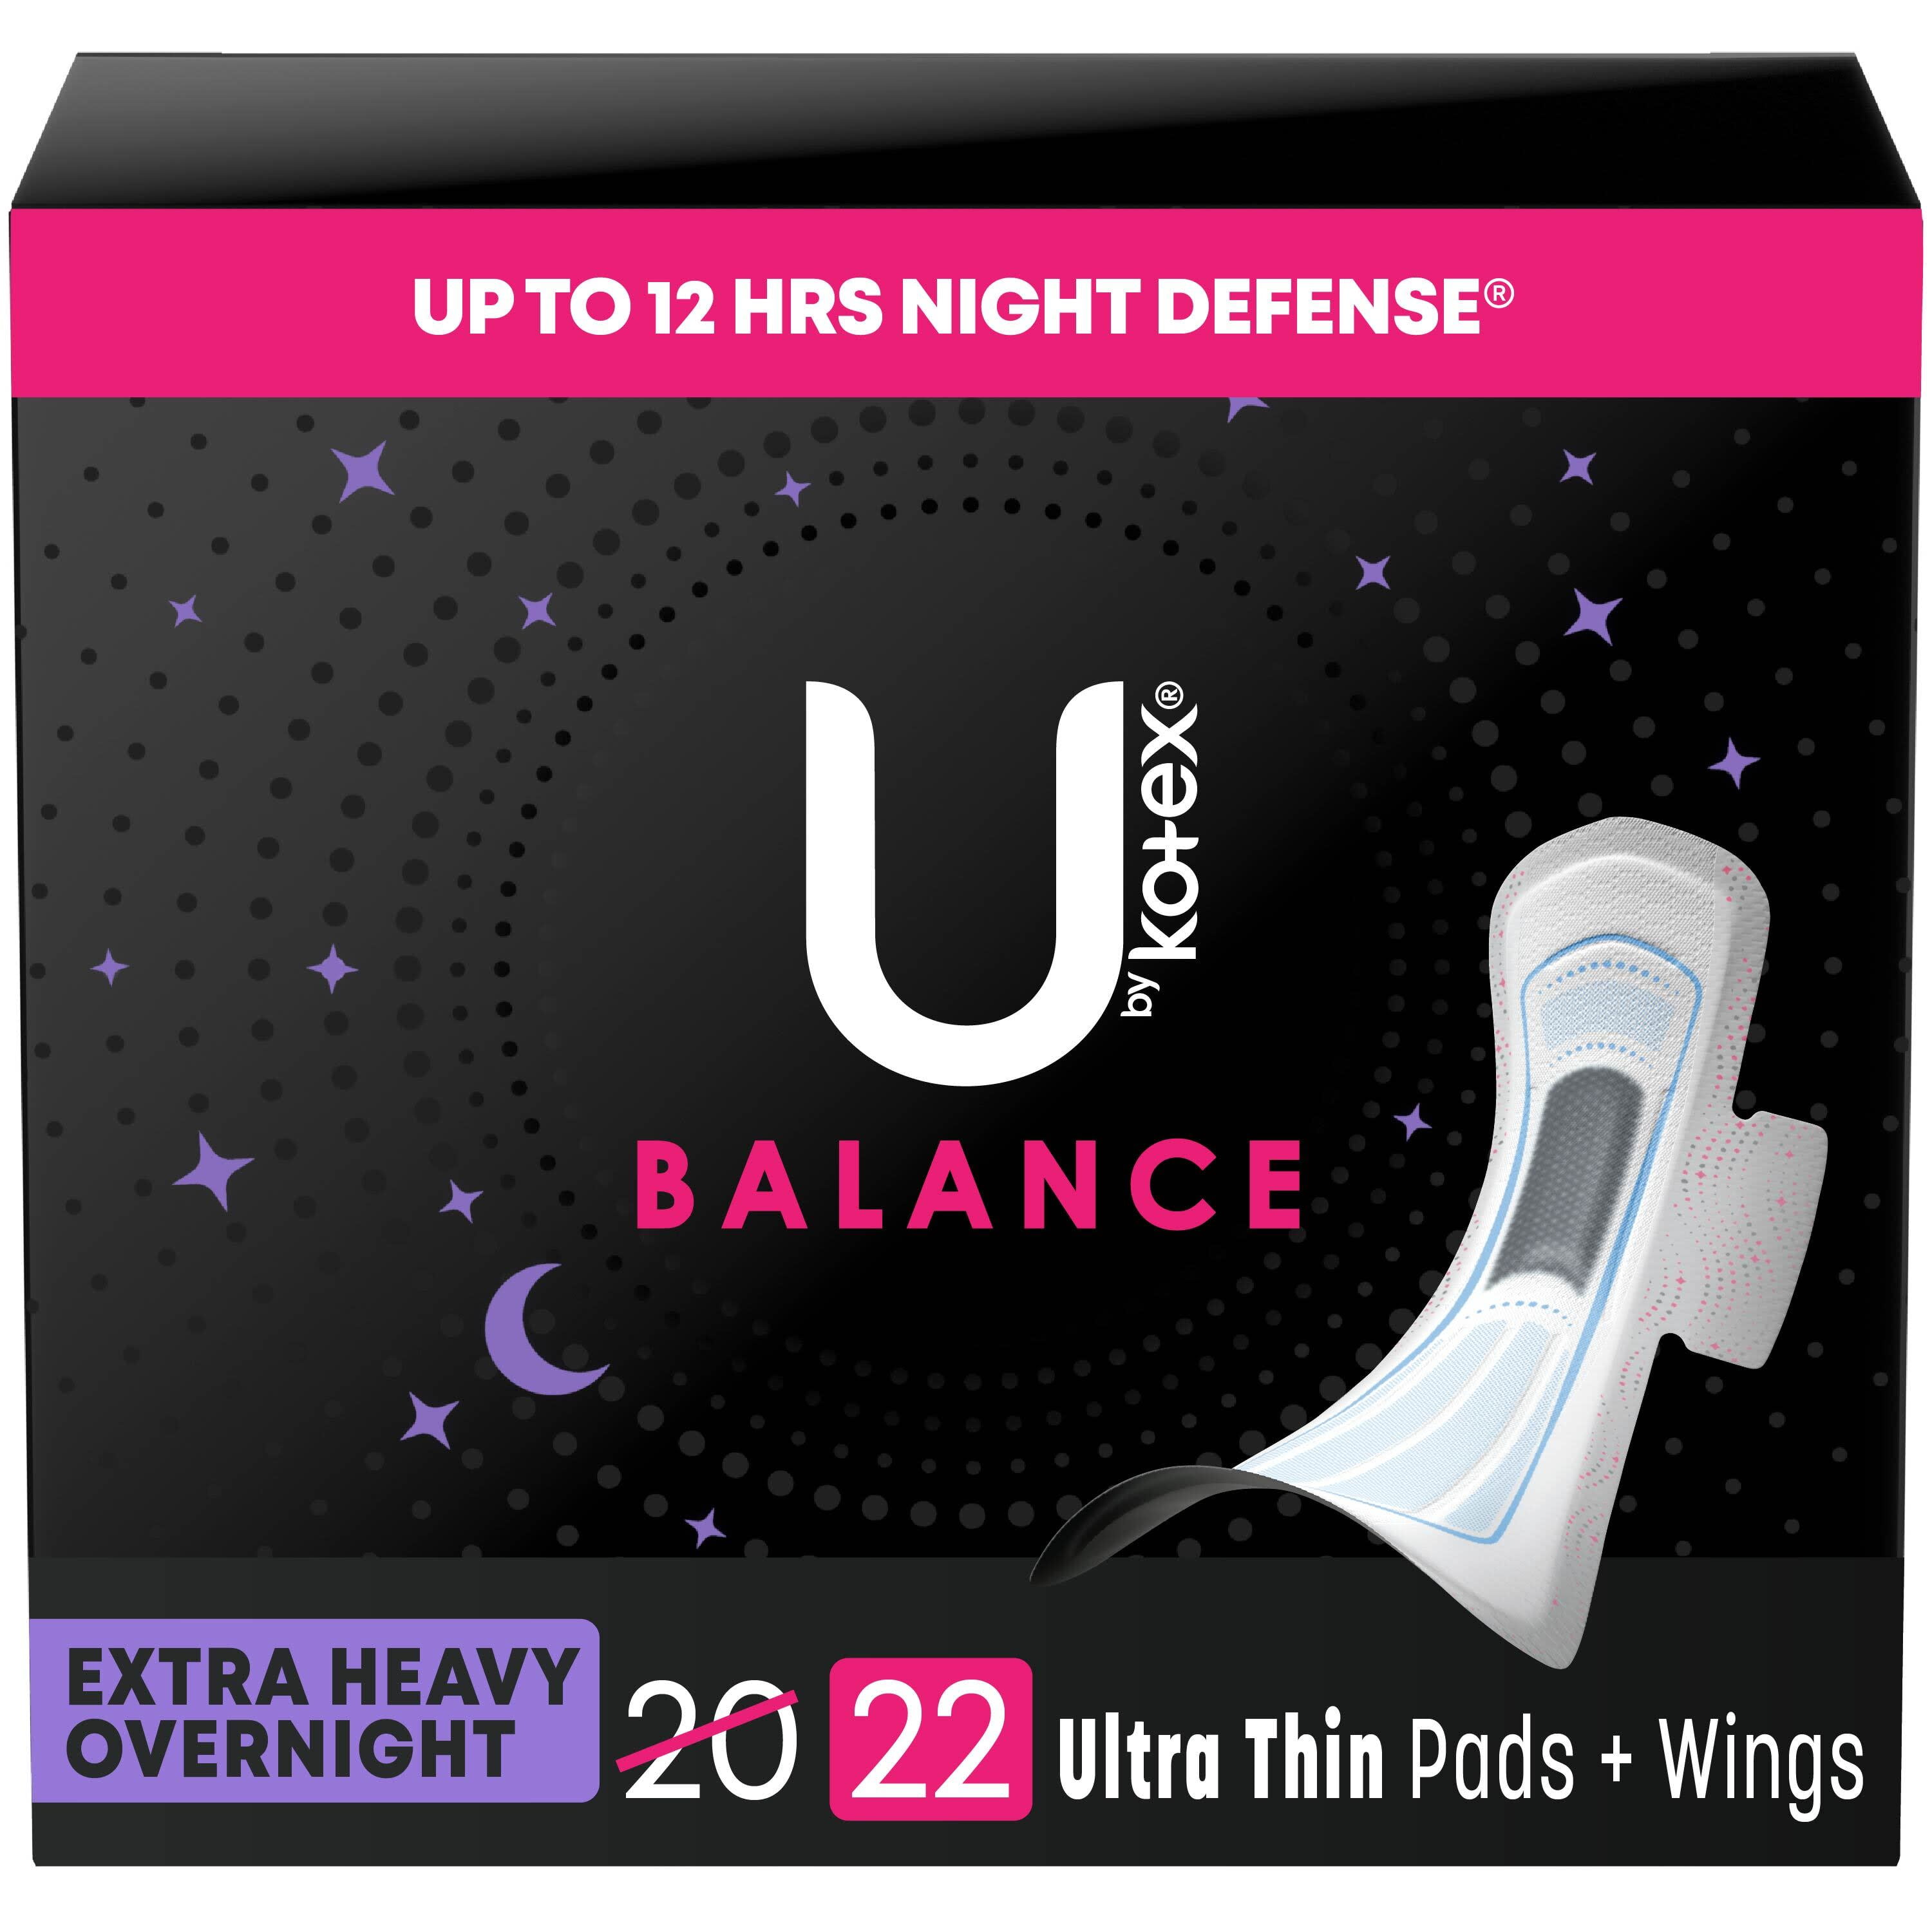 Wholesale U by Kotex Overnight Security Maxi Pads - Pack of 14 - Weiner's  LTD